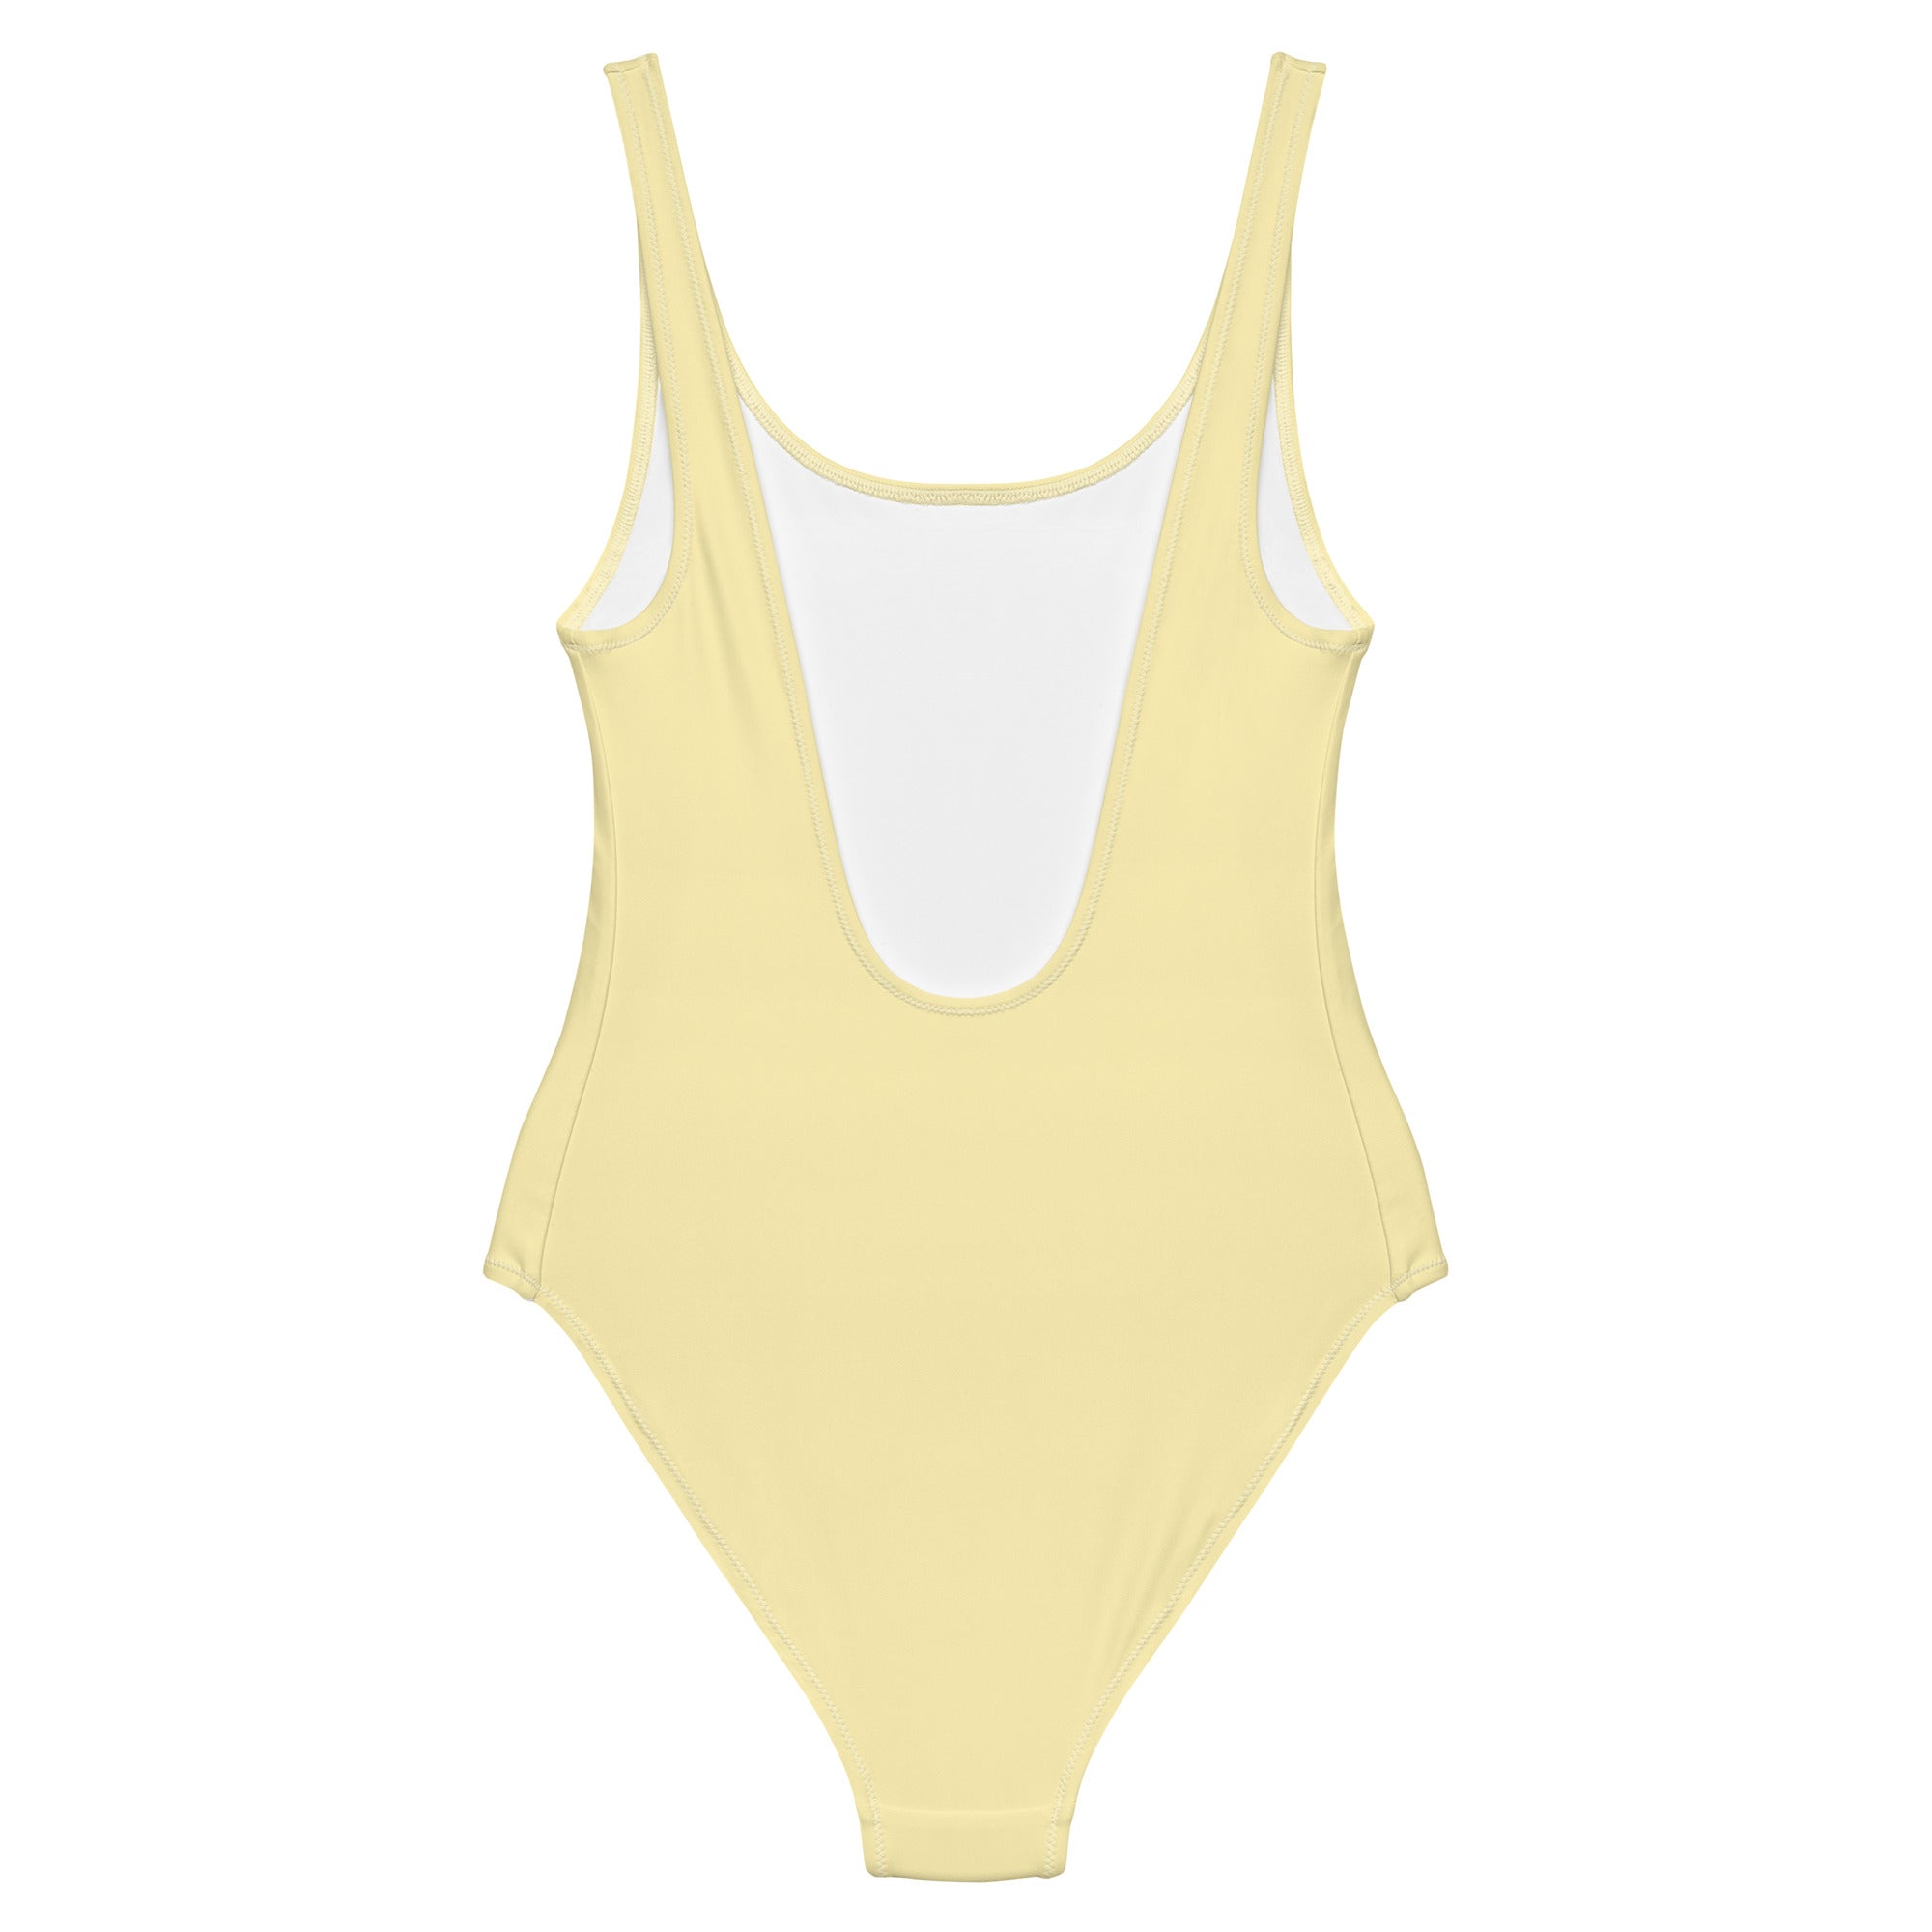 Vongole - Swimsuit - The Refined Spirit